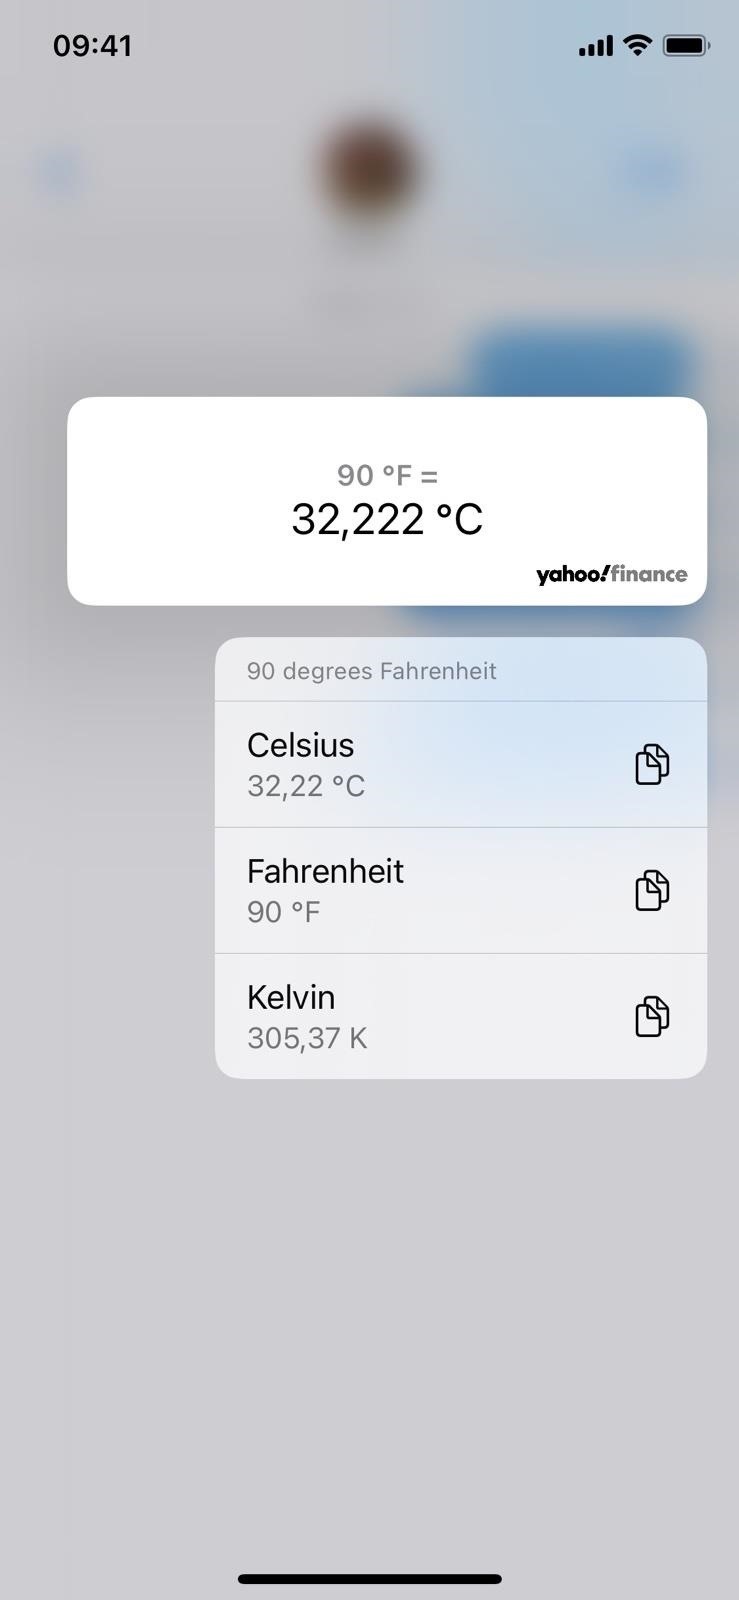 iOS 16 Has a Hidden Unit Converter for Temperatures, Time Zones, Distance, and Other Measurements